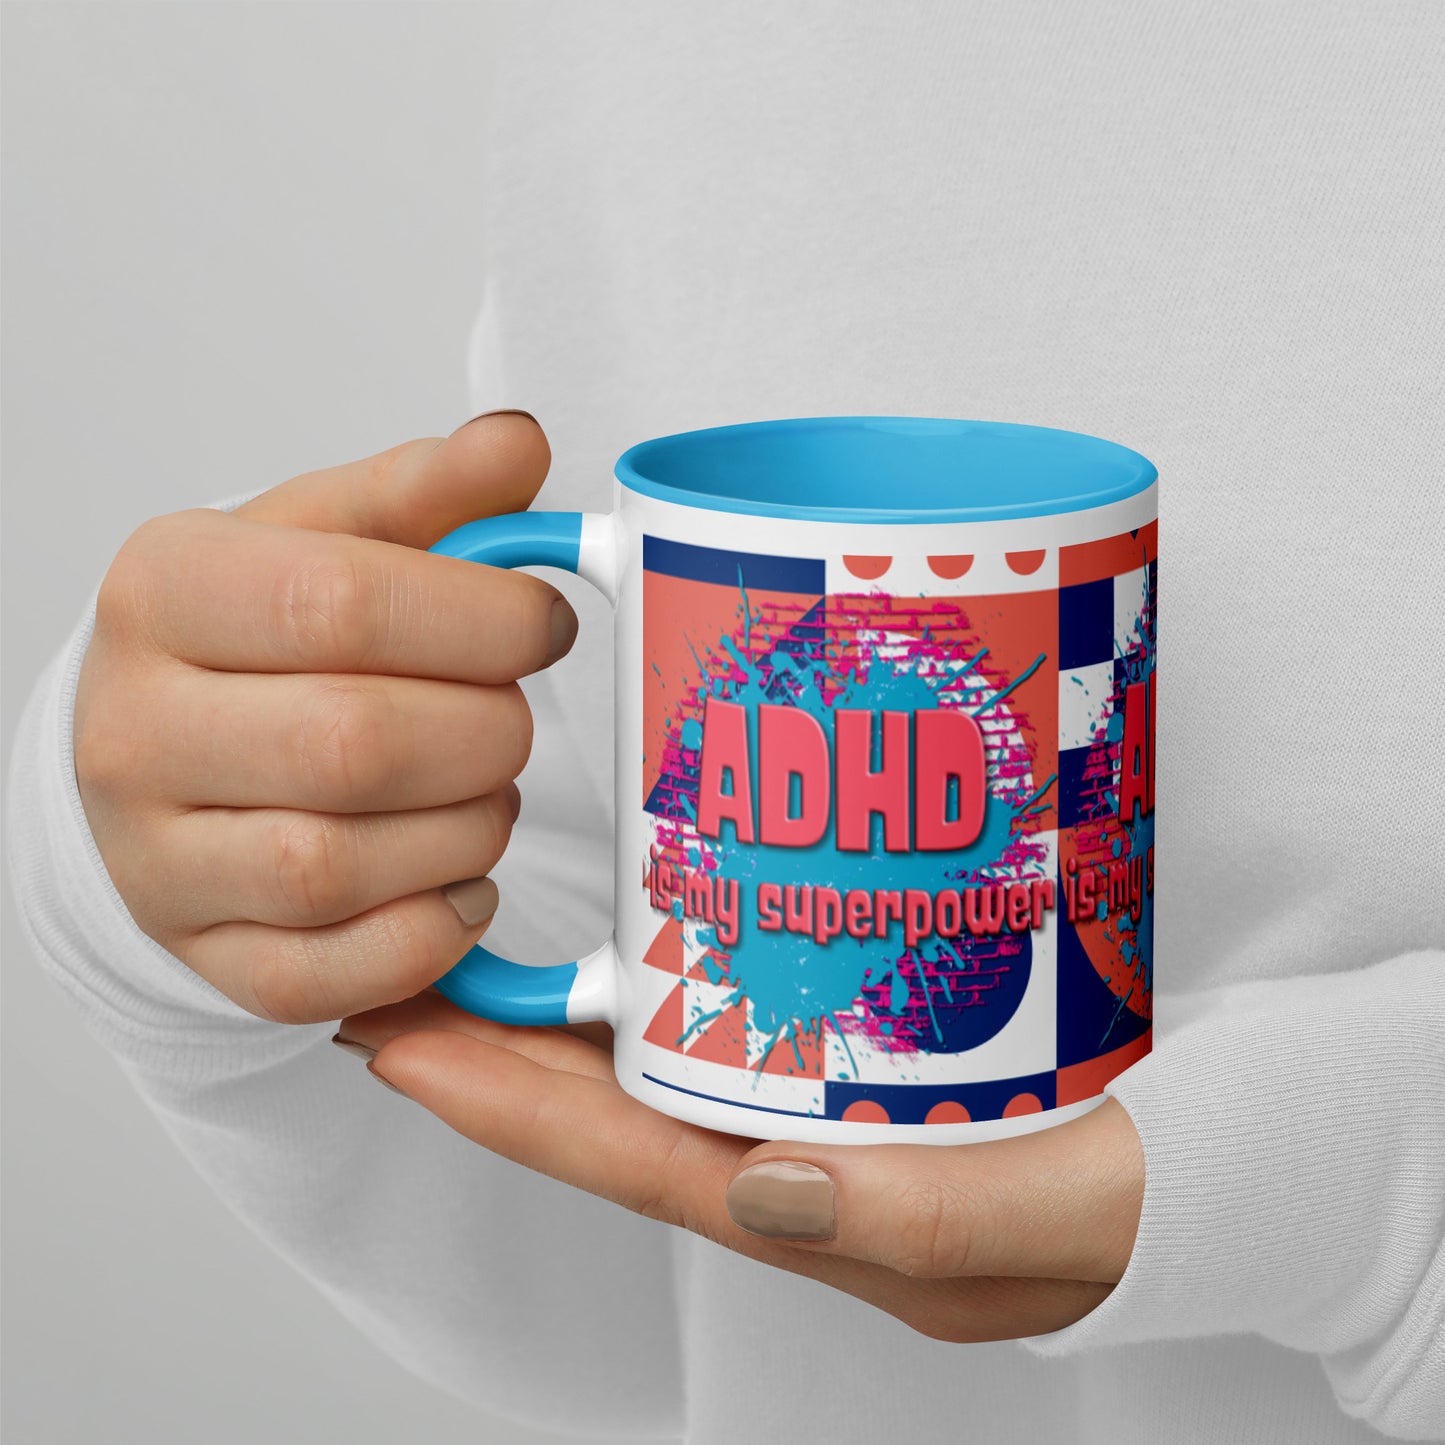 ADHD IS MY SUPERPOWER- Mug with Color Inside